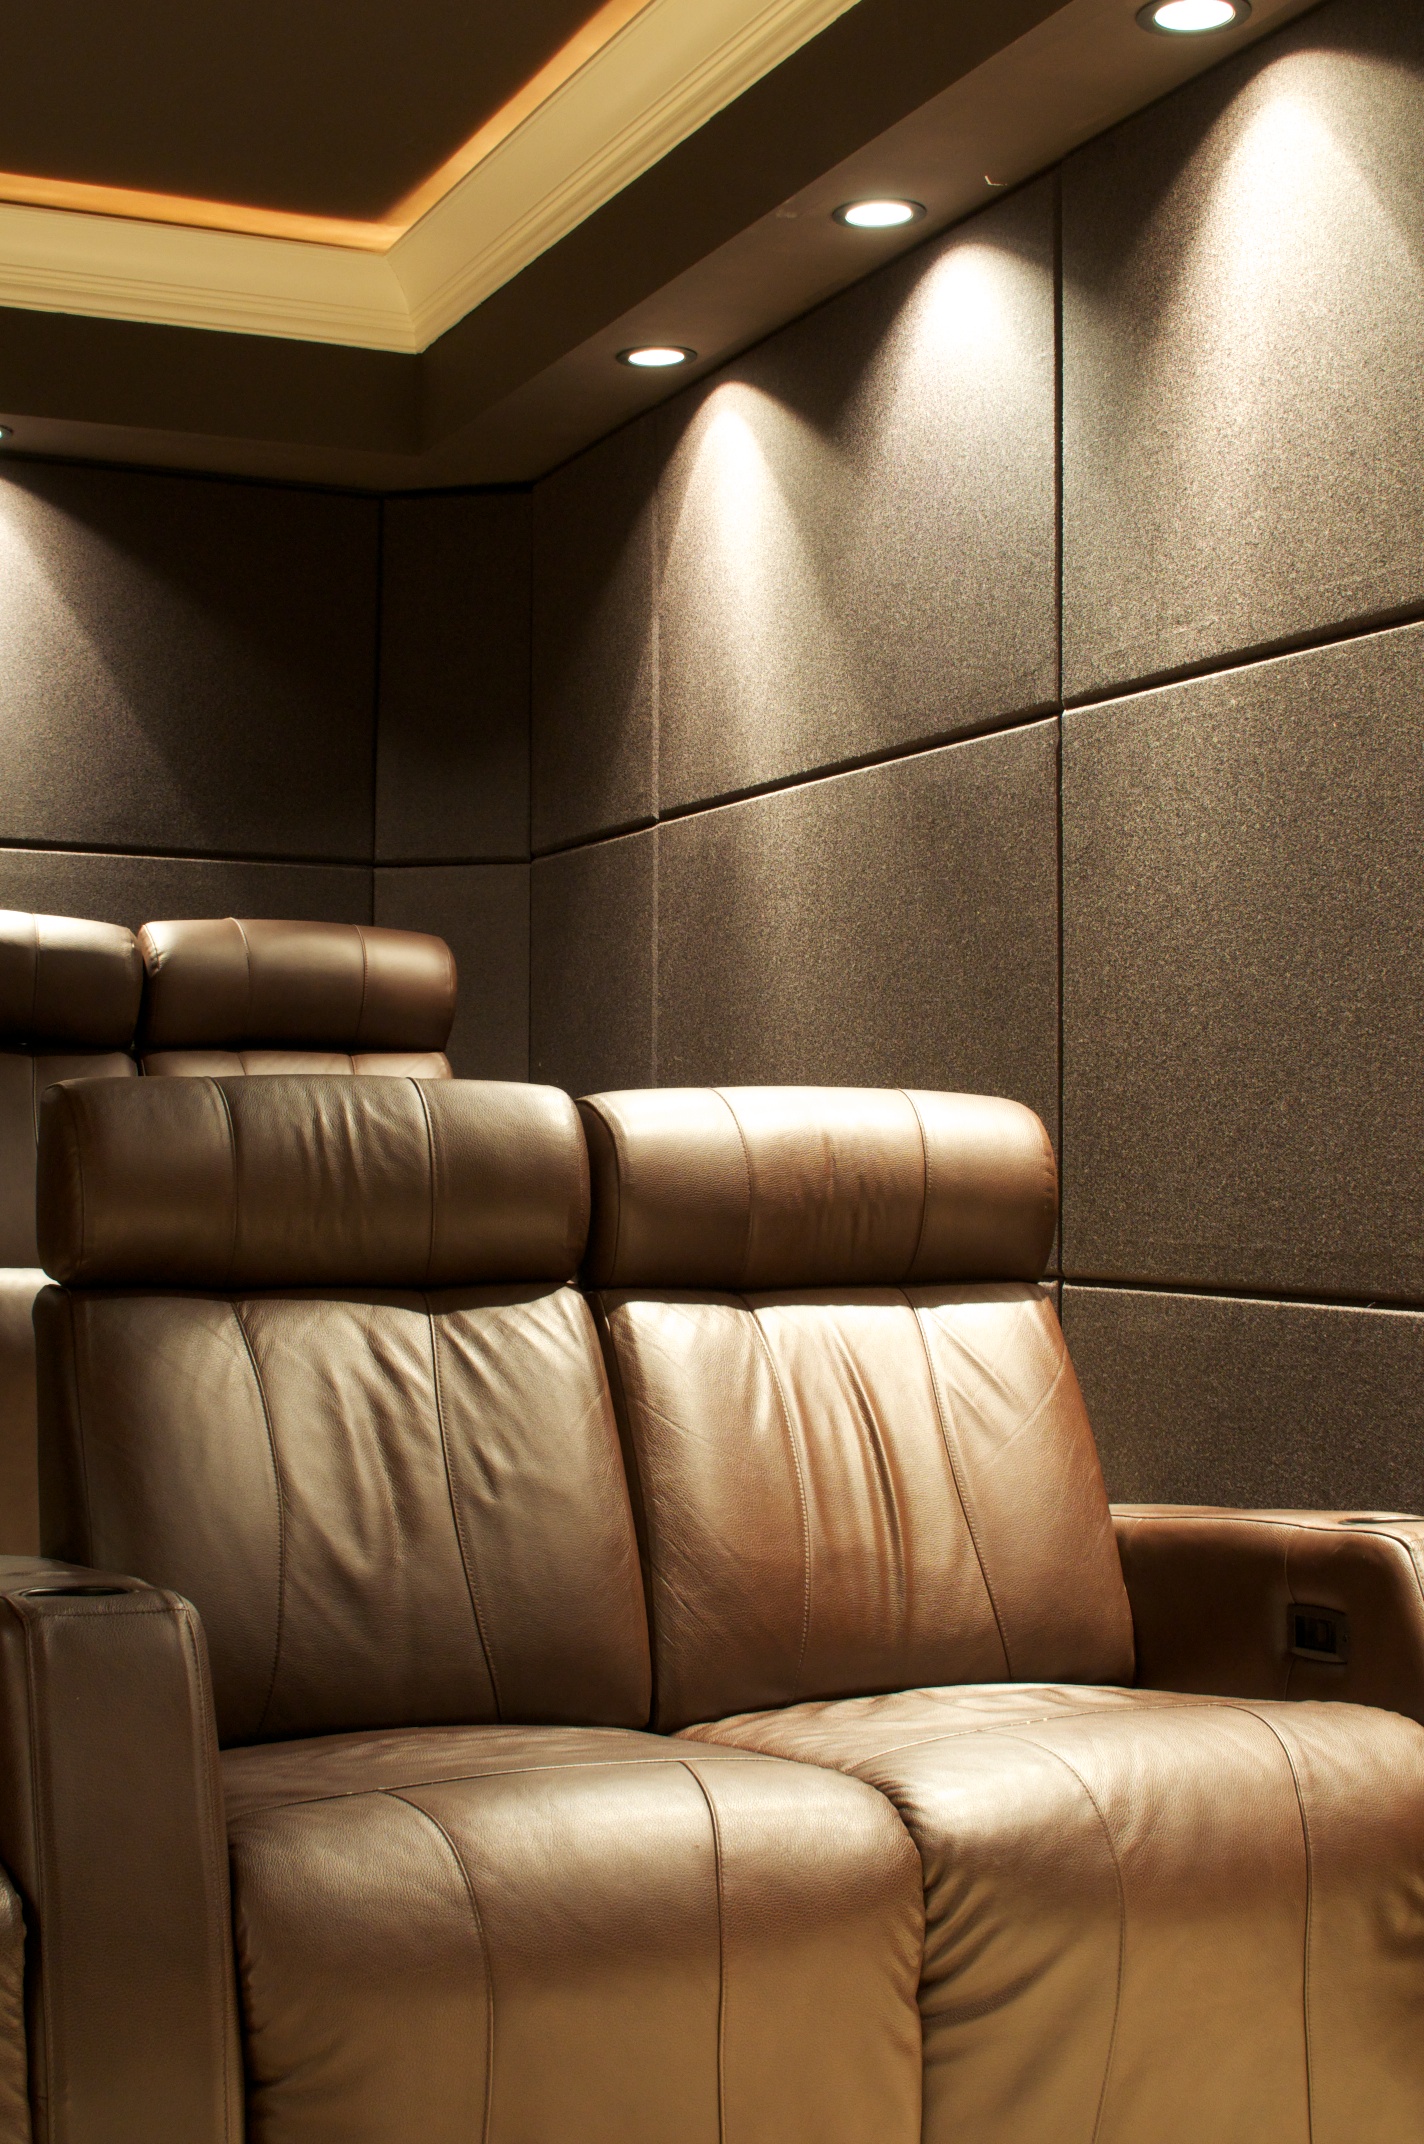 CarltonBale.com » Home Theater Room Acoustic Design Tips